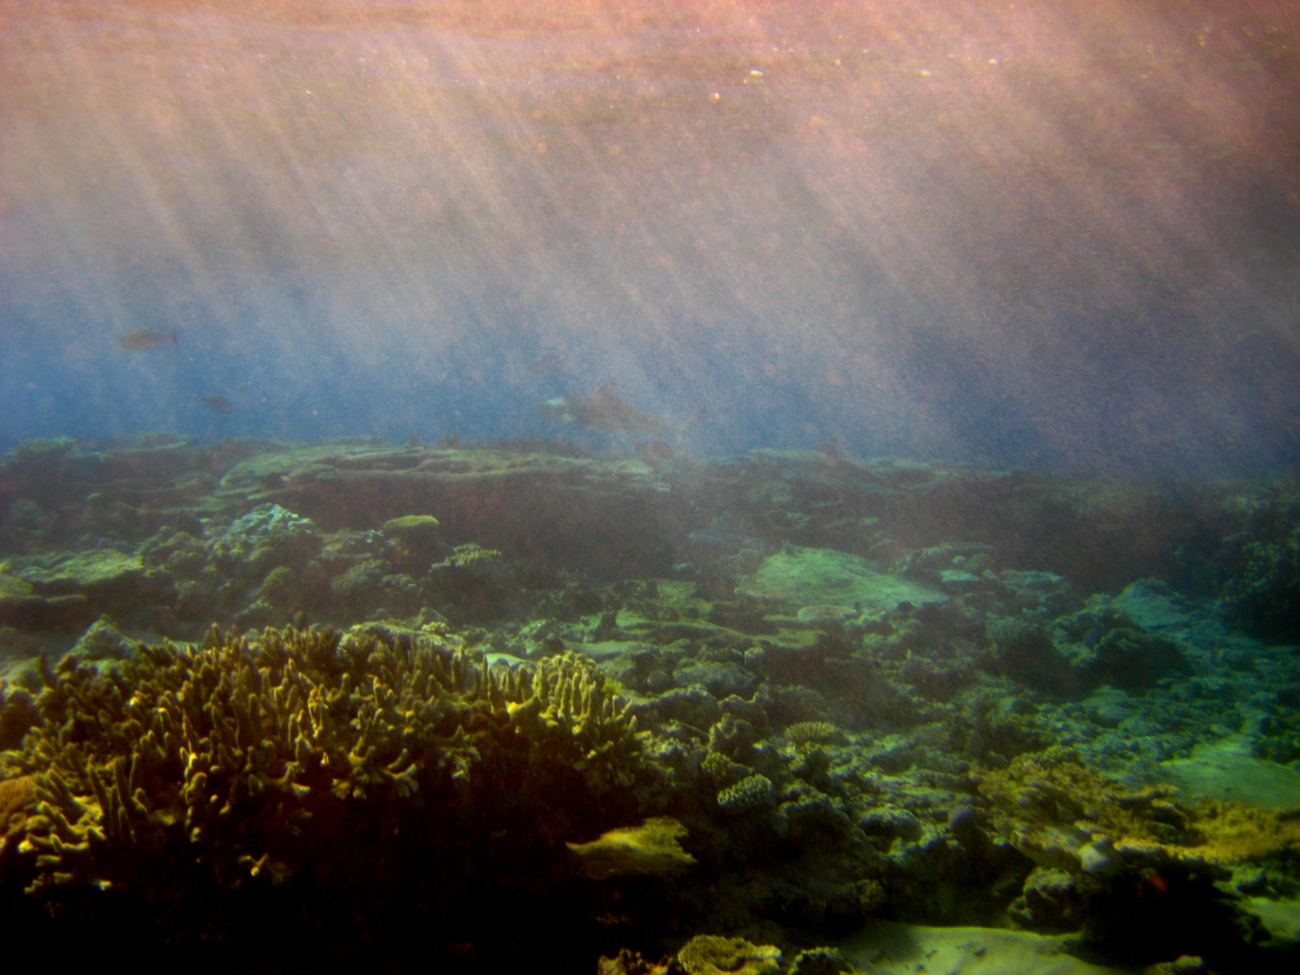 Sunlight filtering down through water onto the reef with sharks